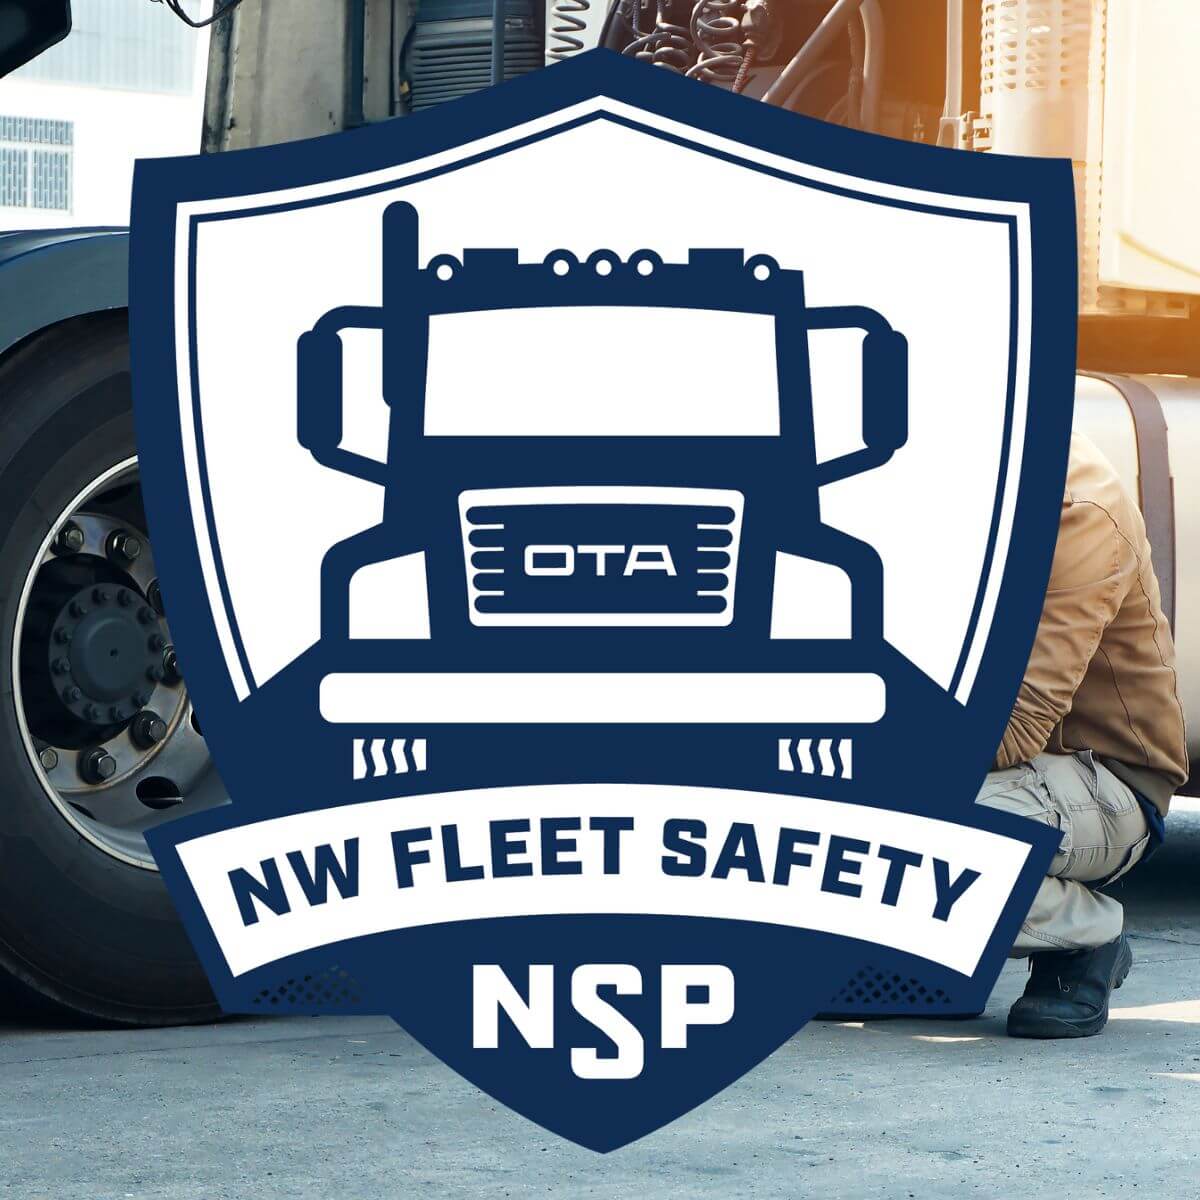 NW Fleet Safety Certification - Classes Start in May